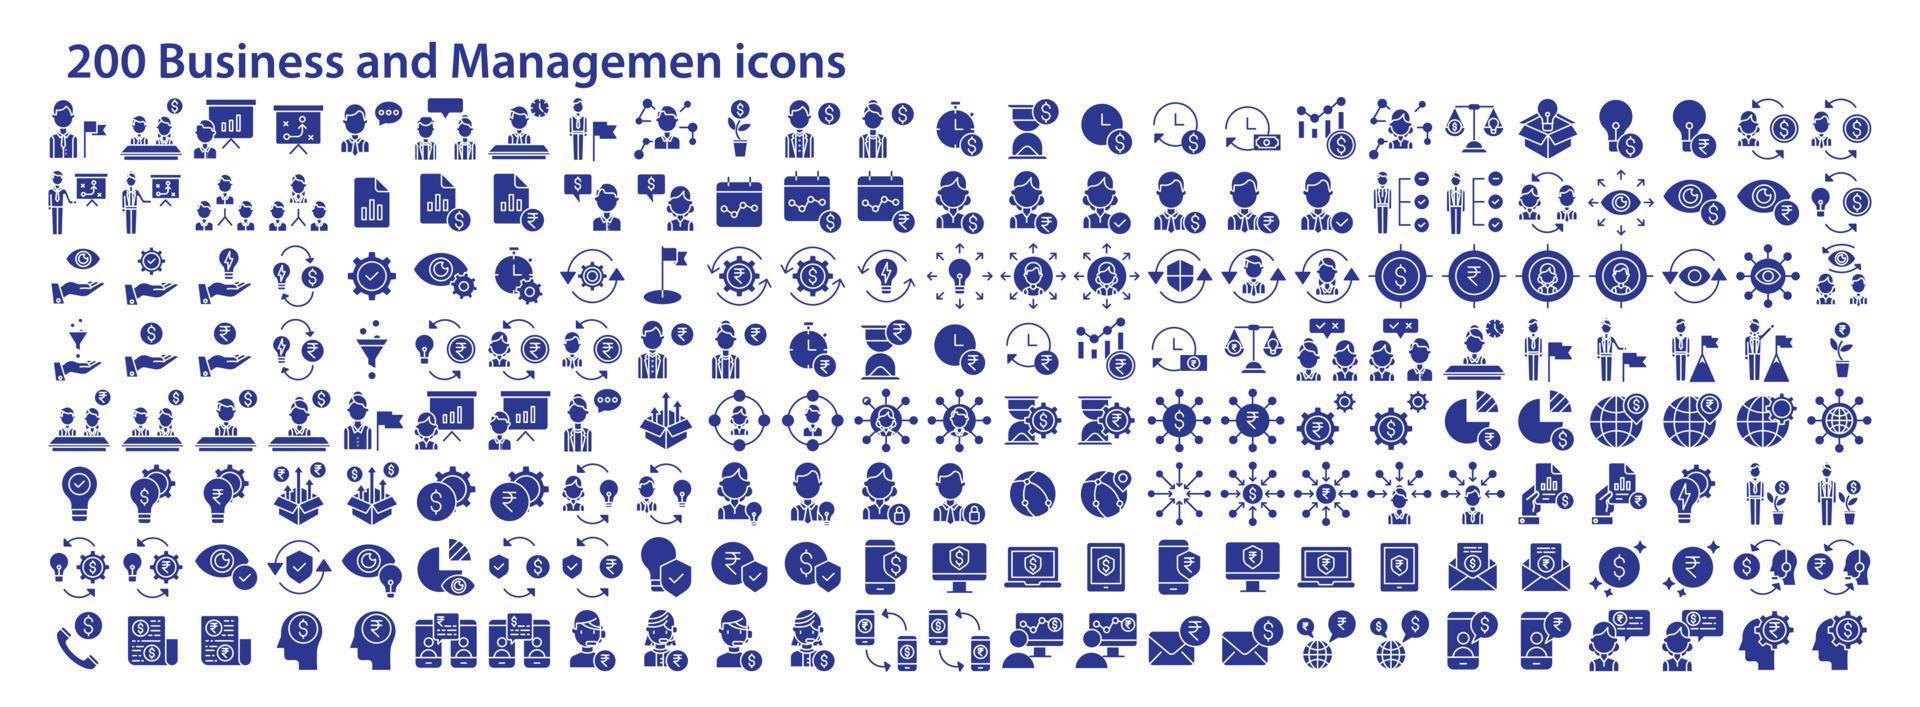 Collection of icons related to Business management and finance startups, including icons like analyst, Dollar, rupee, Strategies and more. vector illustrations, Pixel Perfect